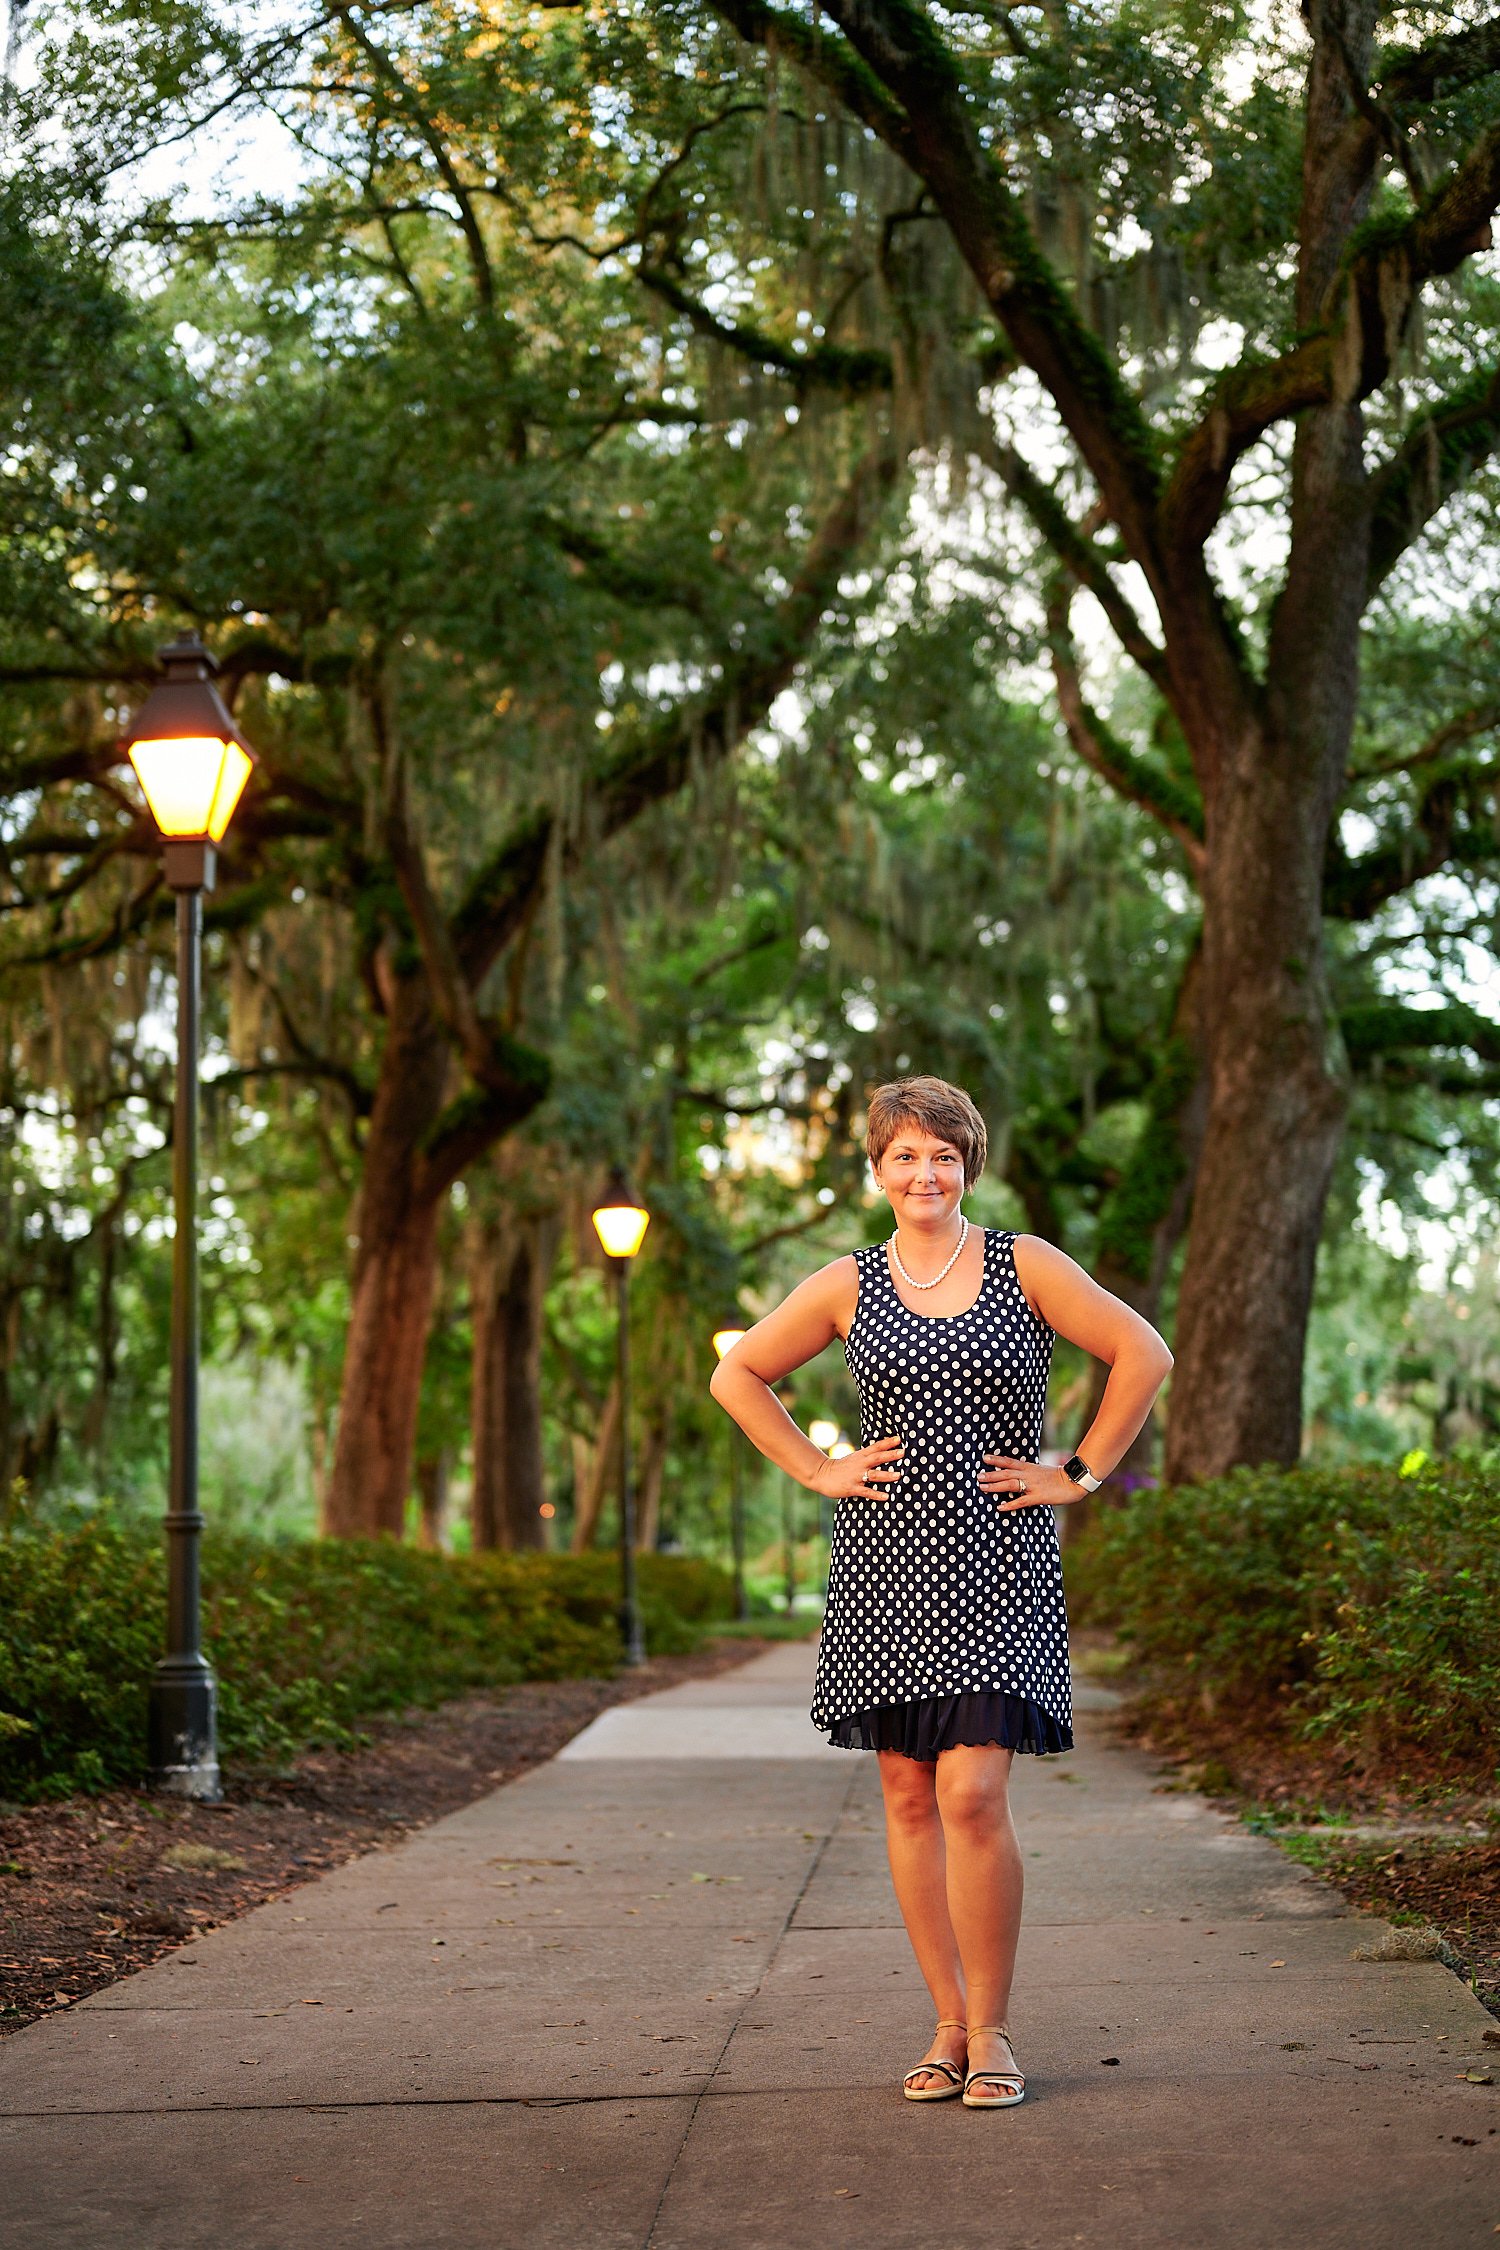  Savannah, Georgia, USA - OCTOBER 9TH 2021: a 44-year-old woman is posing in the streets of Savannah on a warm autumn evening lit by the setting sun. She had short hair and a top with circle ornaments. 